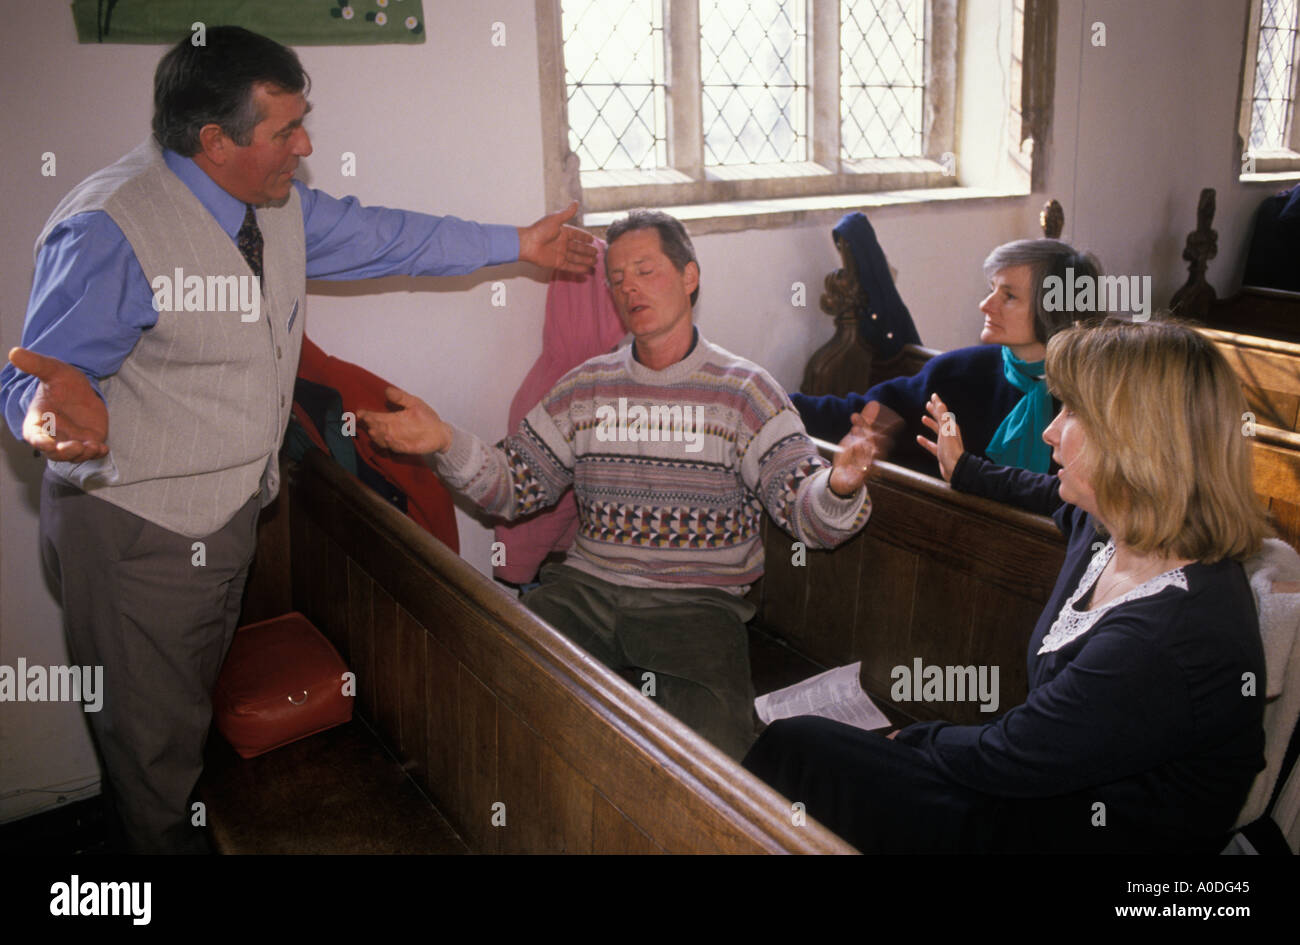 Religious Trance speaking in tongues Uk Church of St Saint Nicolas Ashill Norfolk  1990s HOMER SYKES Stock Photo